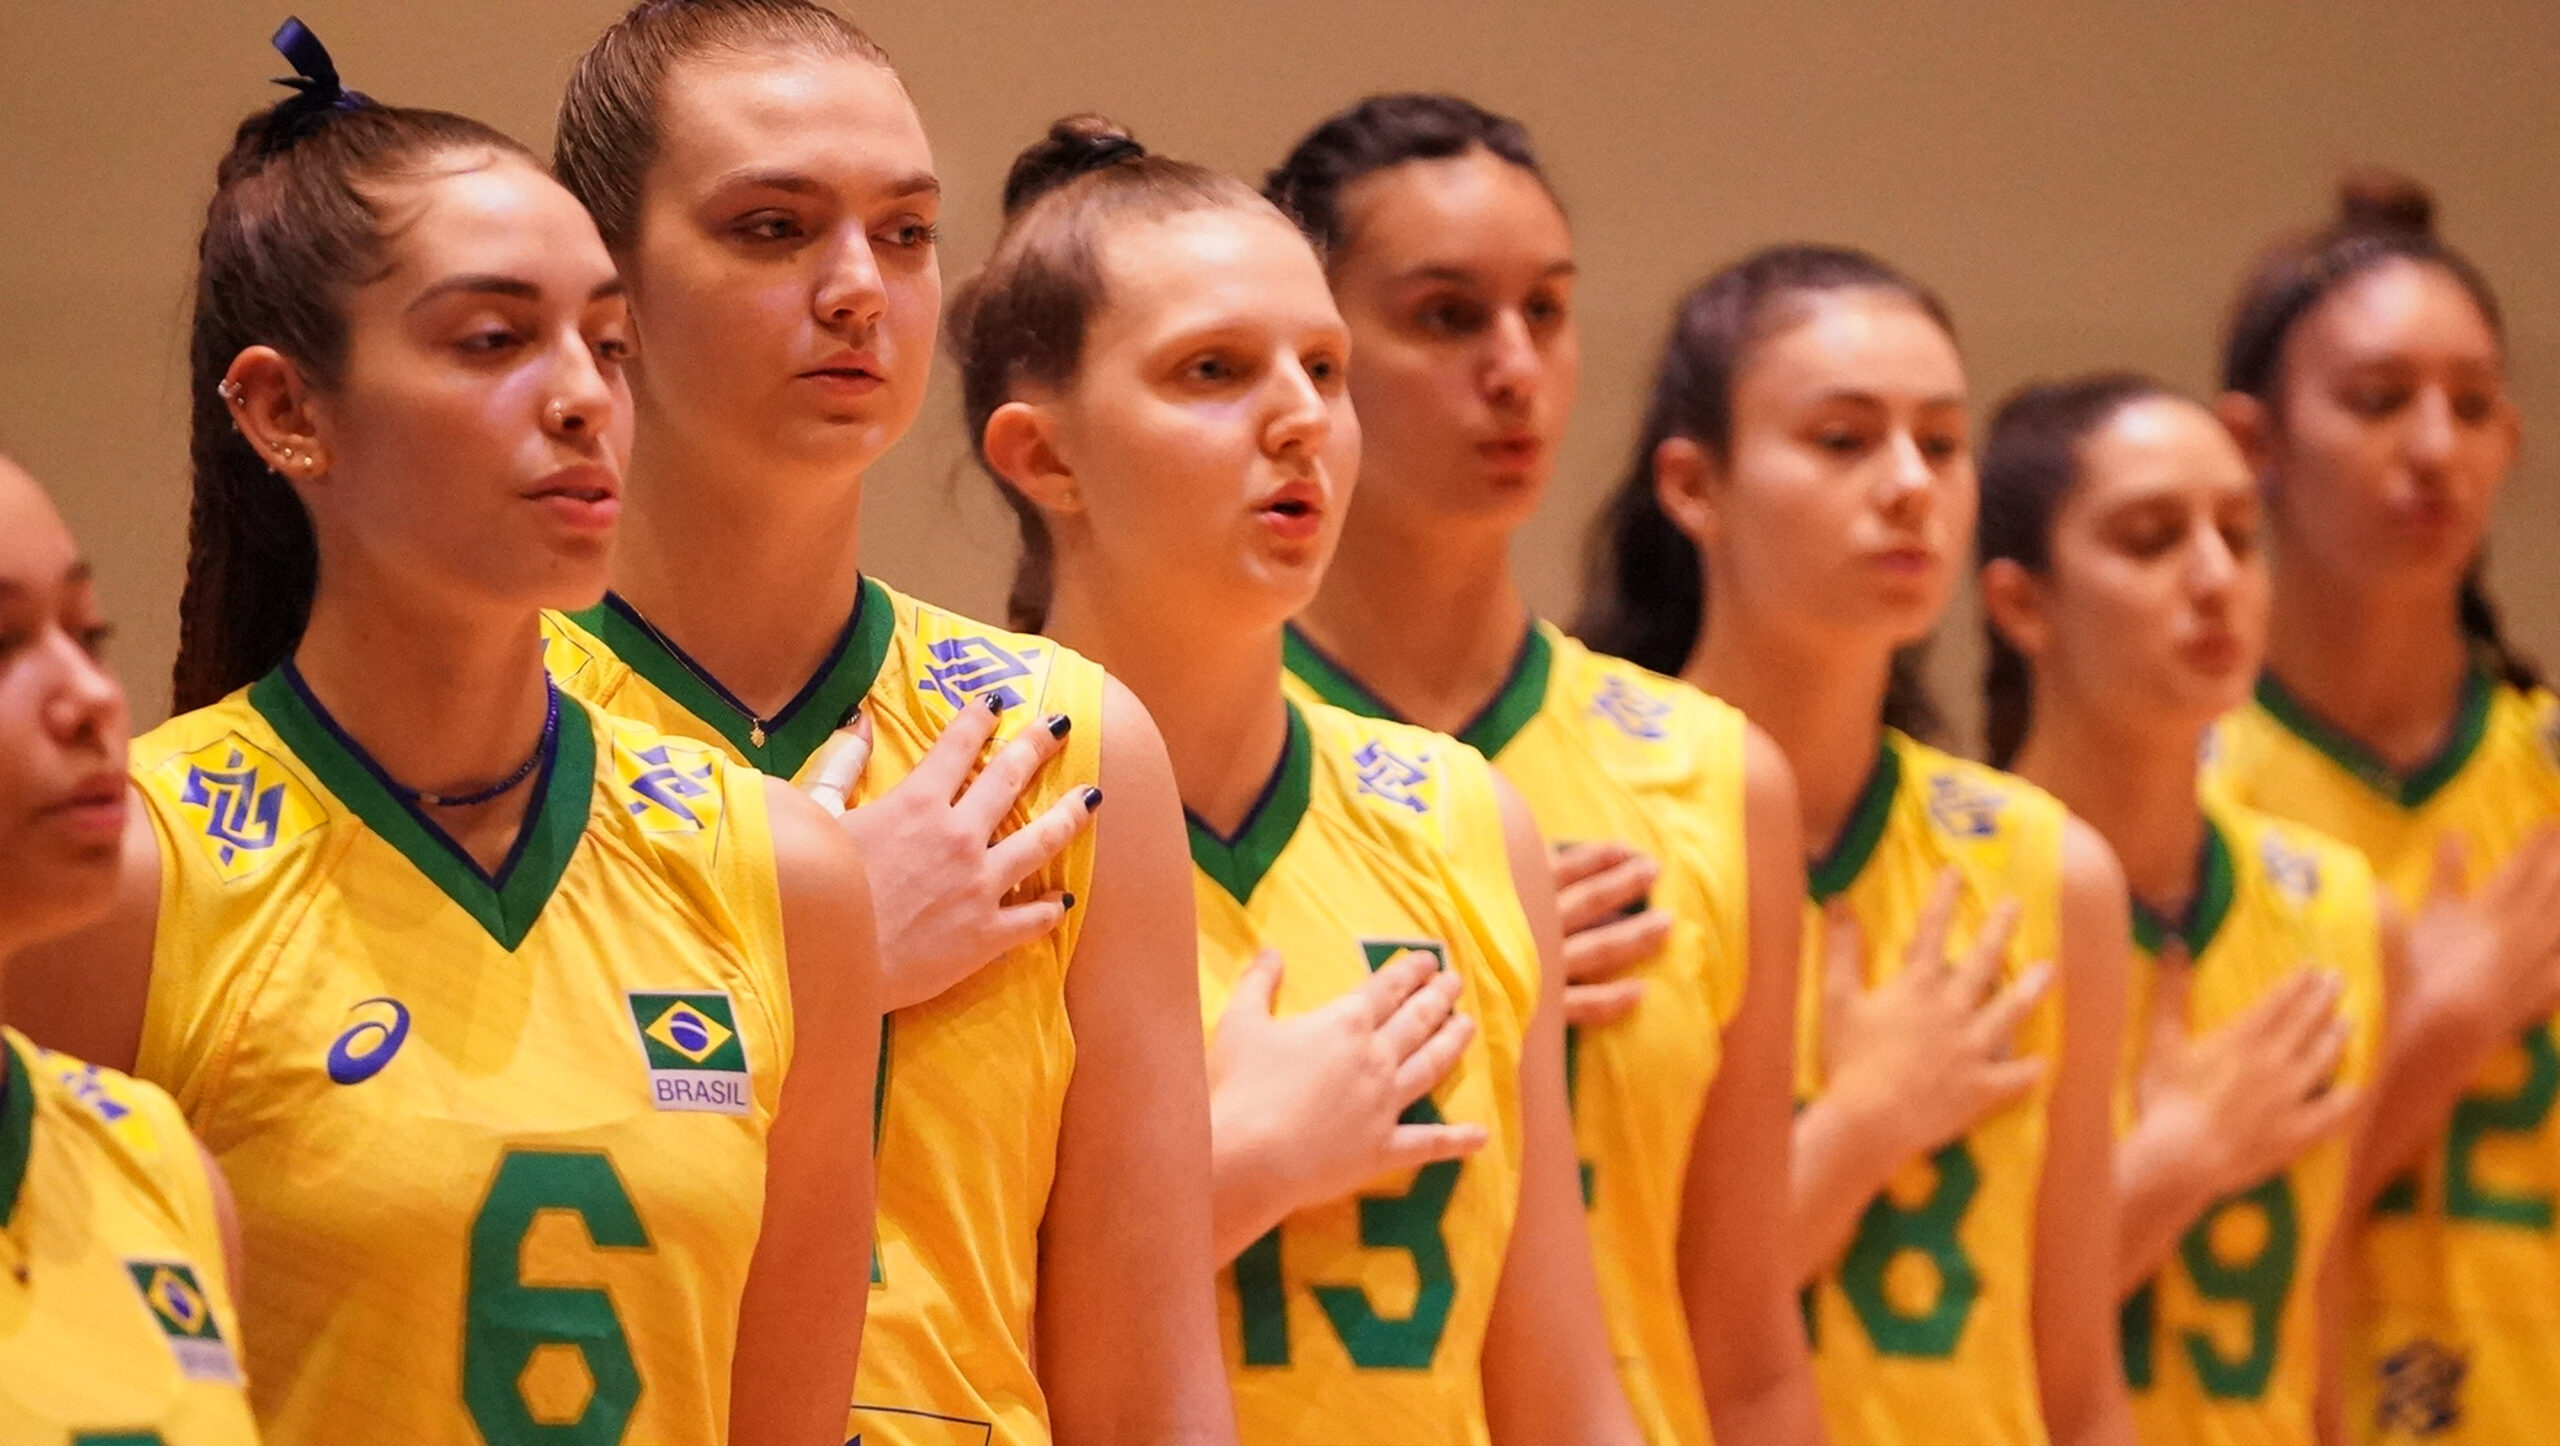 Brazil to Play for Title after Going Five Sets with Puerto Rico